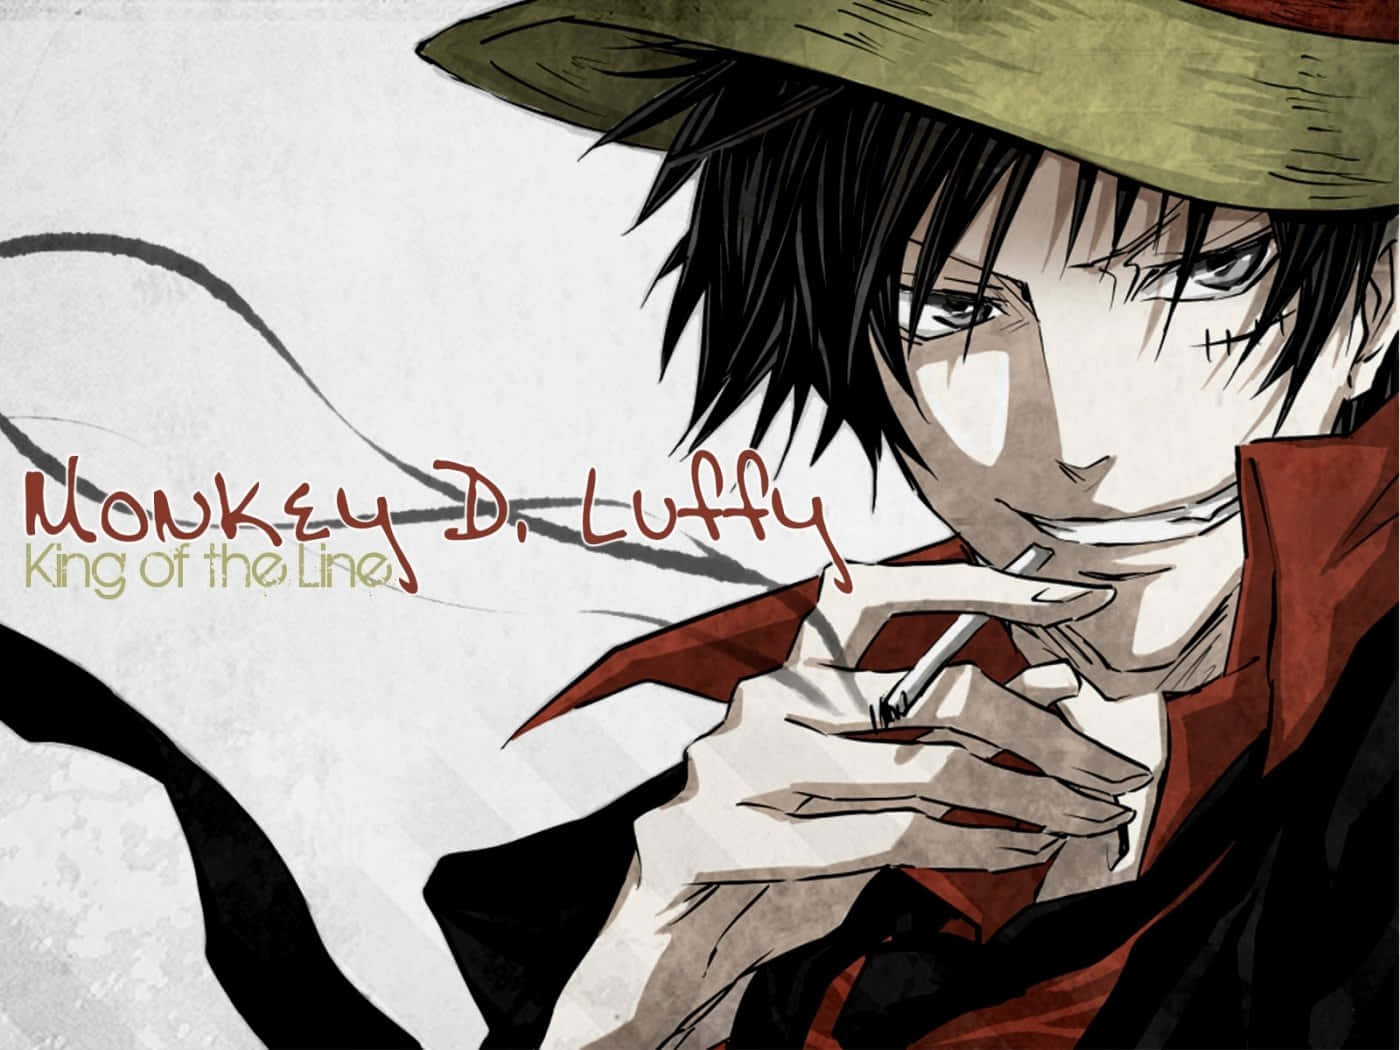 Epicluffy One Piece Cigarette: Episk Luffy One Piece Cigarette. (note: This Sentence Can Be Used As A Caption For A Wallpaper Featuring The Character Luffy From The Anime/manga Series One Piece Smoking A Cigarette) Wallpaper